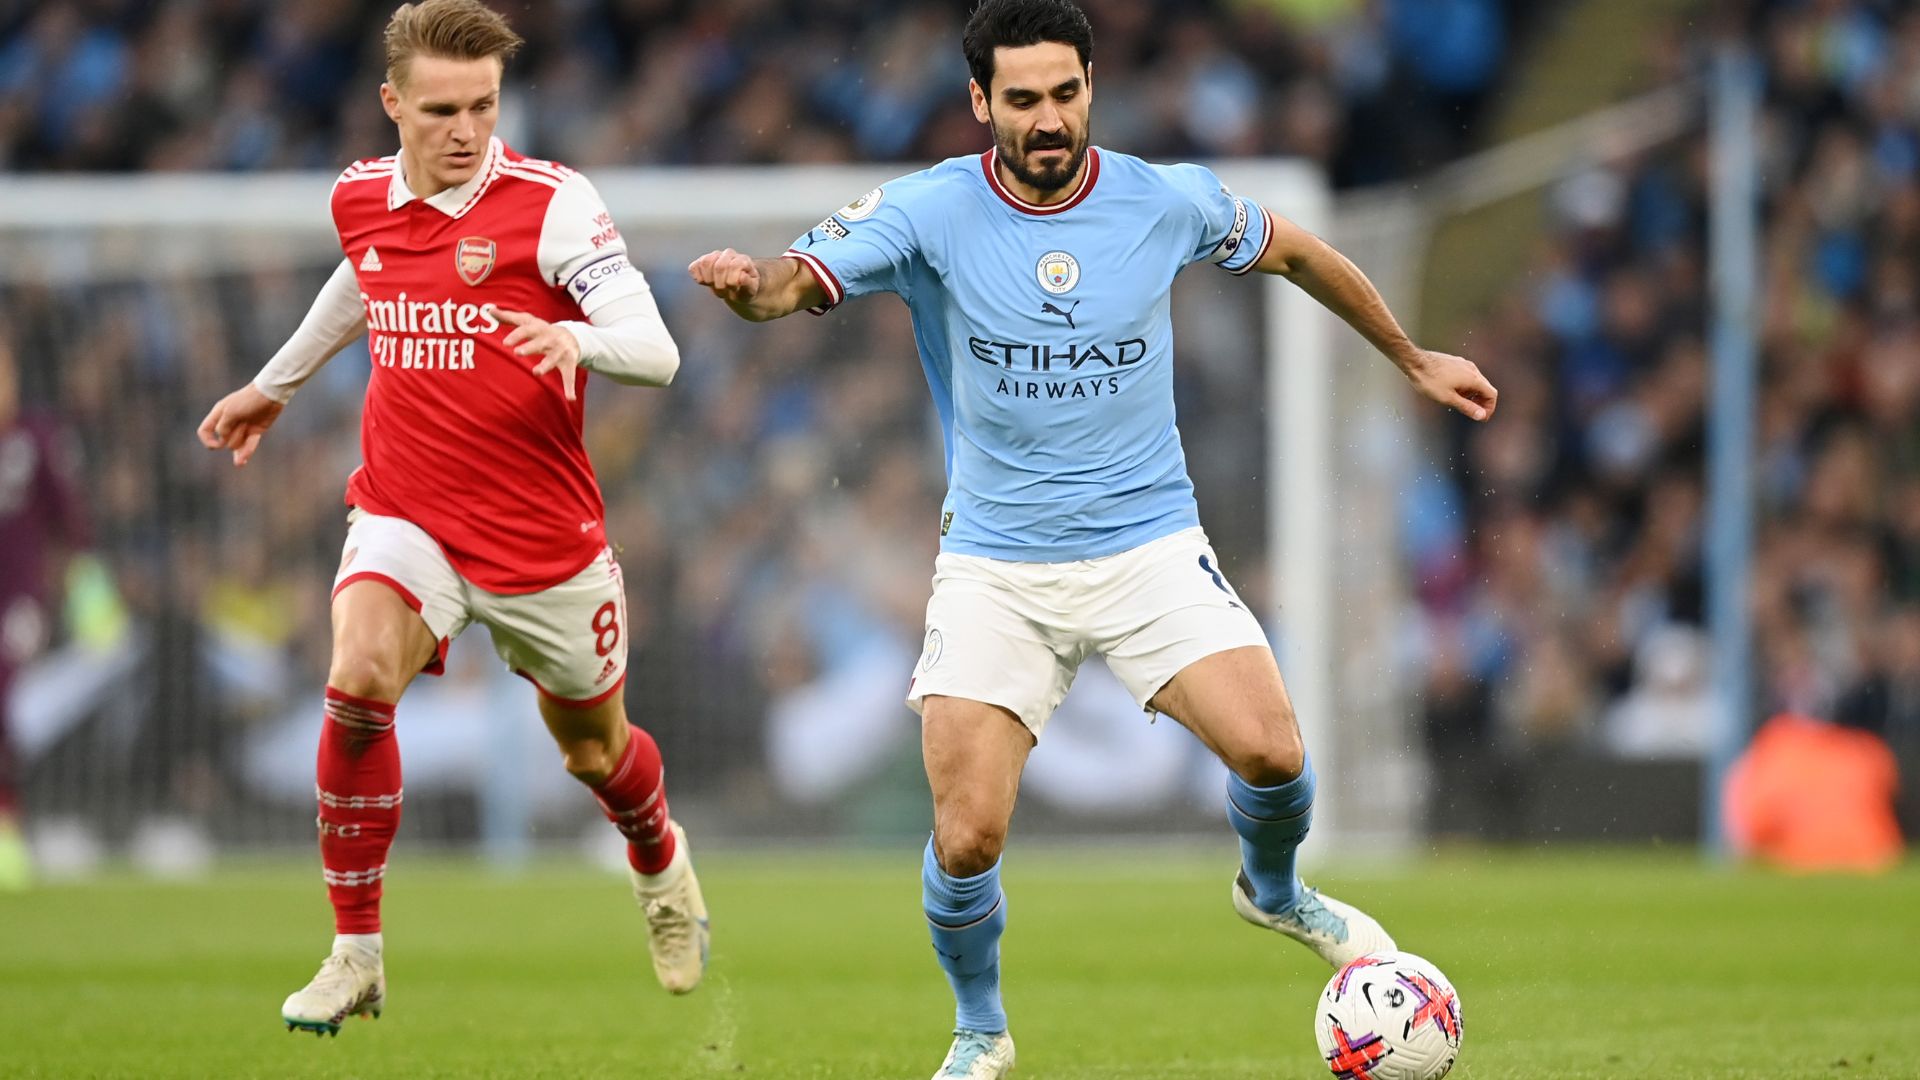 Manchester City and Arsenal clash for the Premier League title